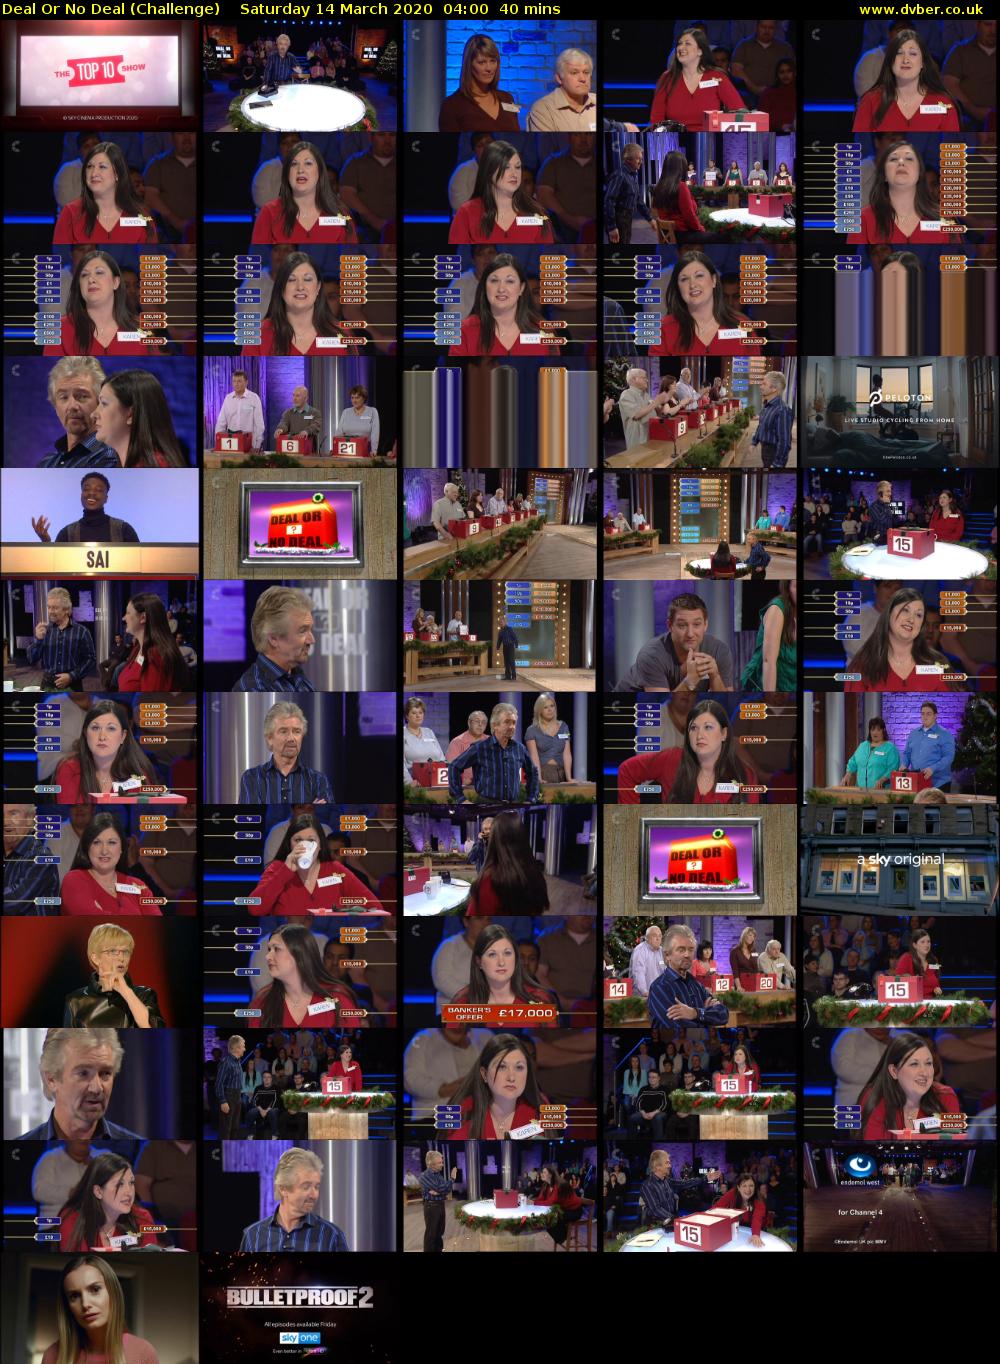 Deal Or No Deal (Challenge) Saturday 14 March 2020 04:00 - 04:40